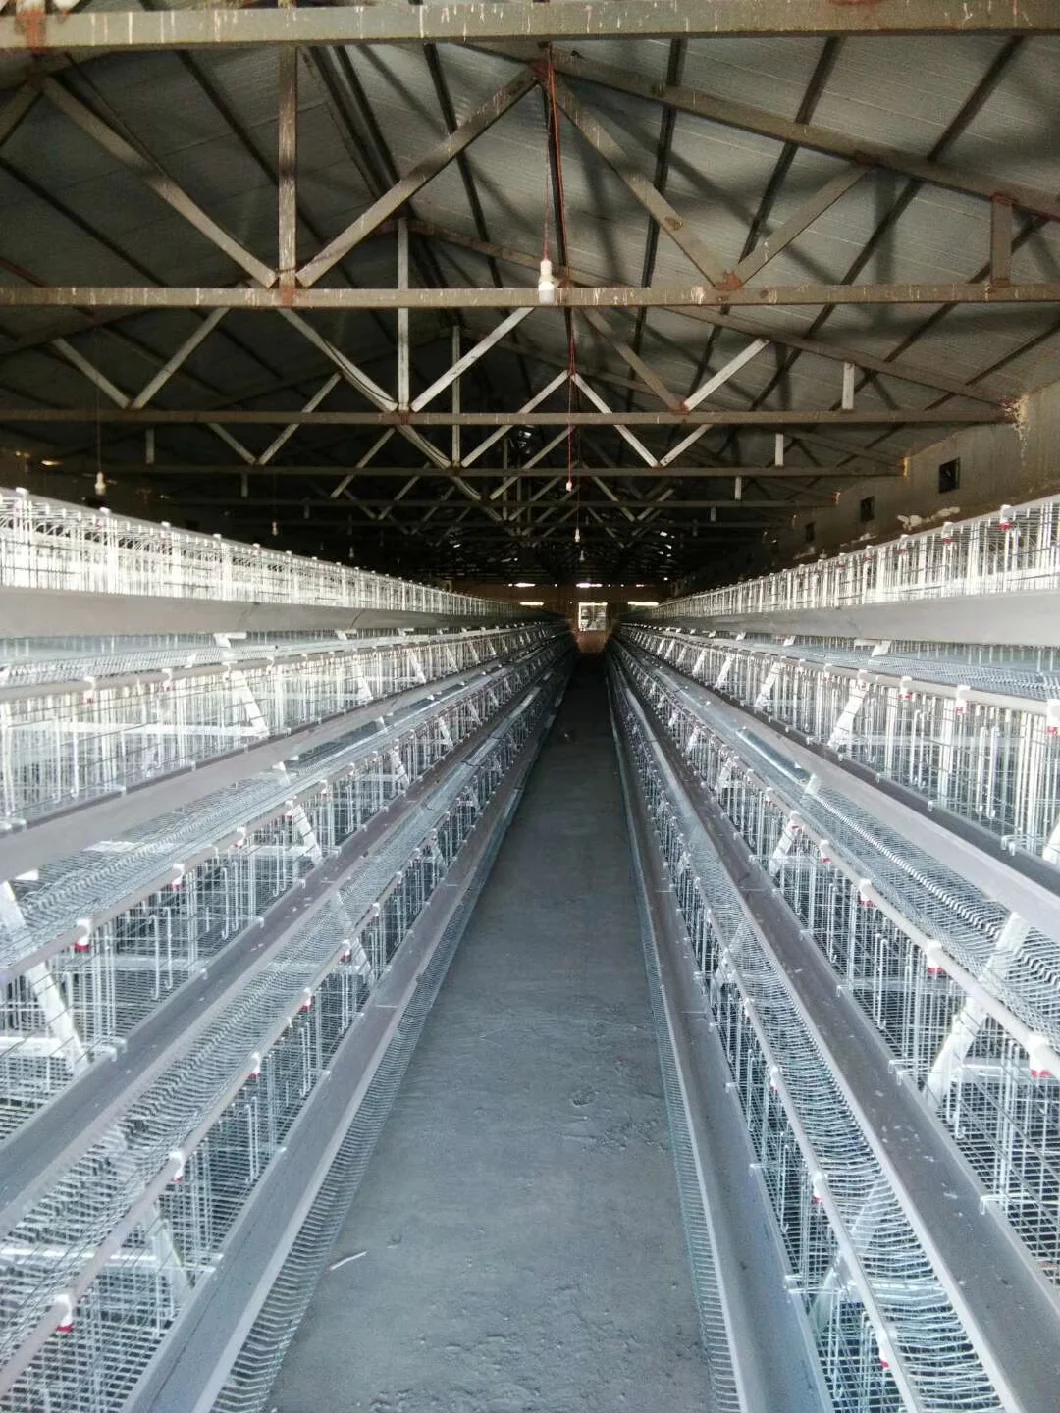 Hot Galvanized Africa Poultry Farms Automatic Chicken Layer Bird Cage